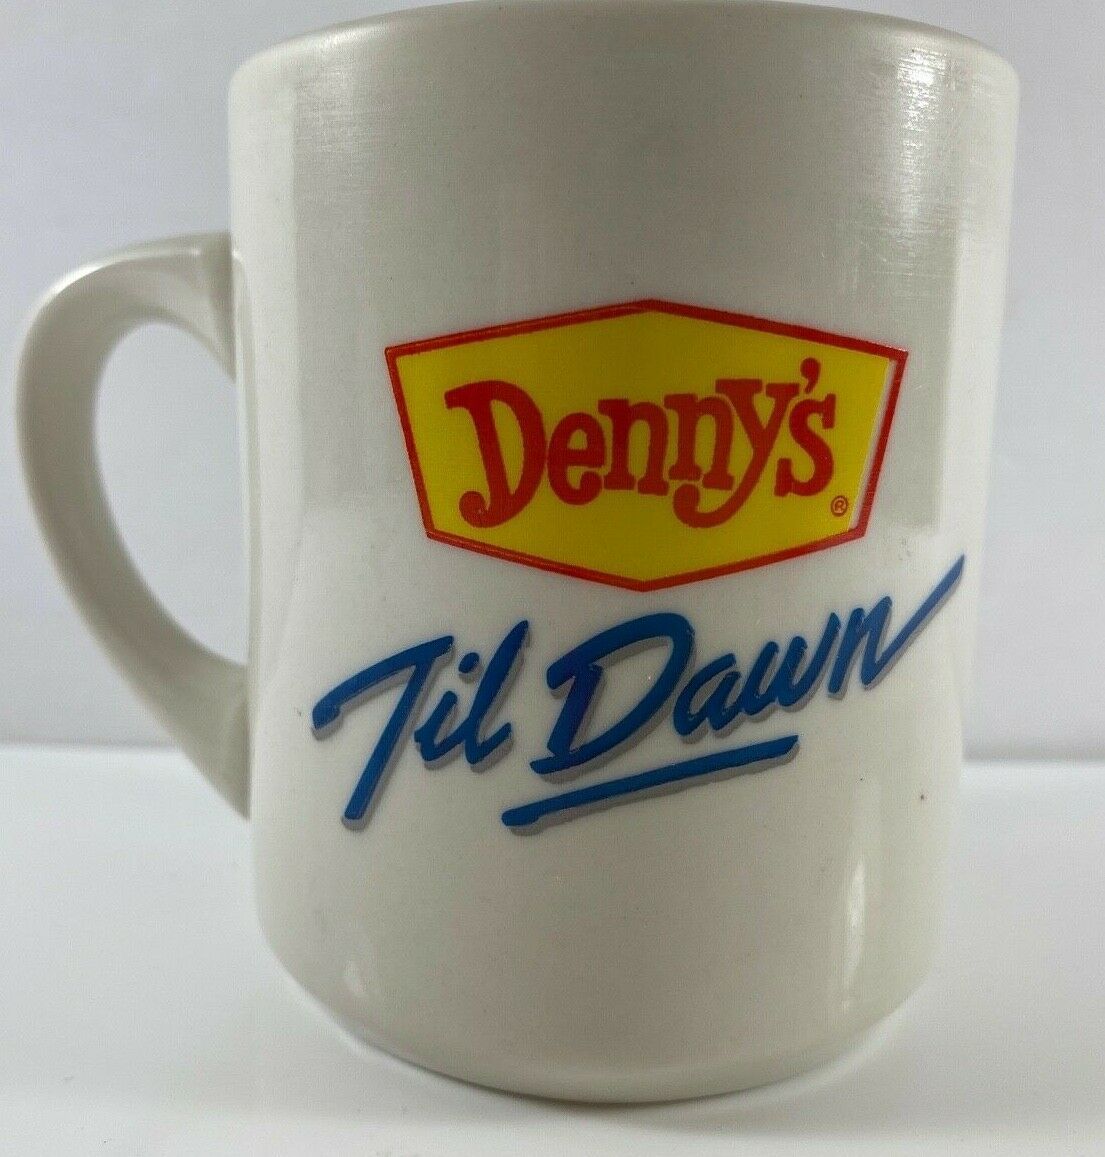 Denny's Till Dawn Coffee Mug with Smiling Moon Face Double Sided Cup Mug Vintage - $16.82